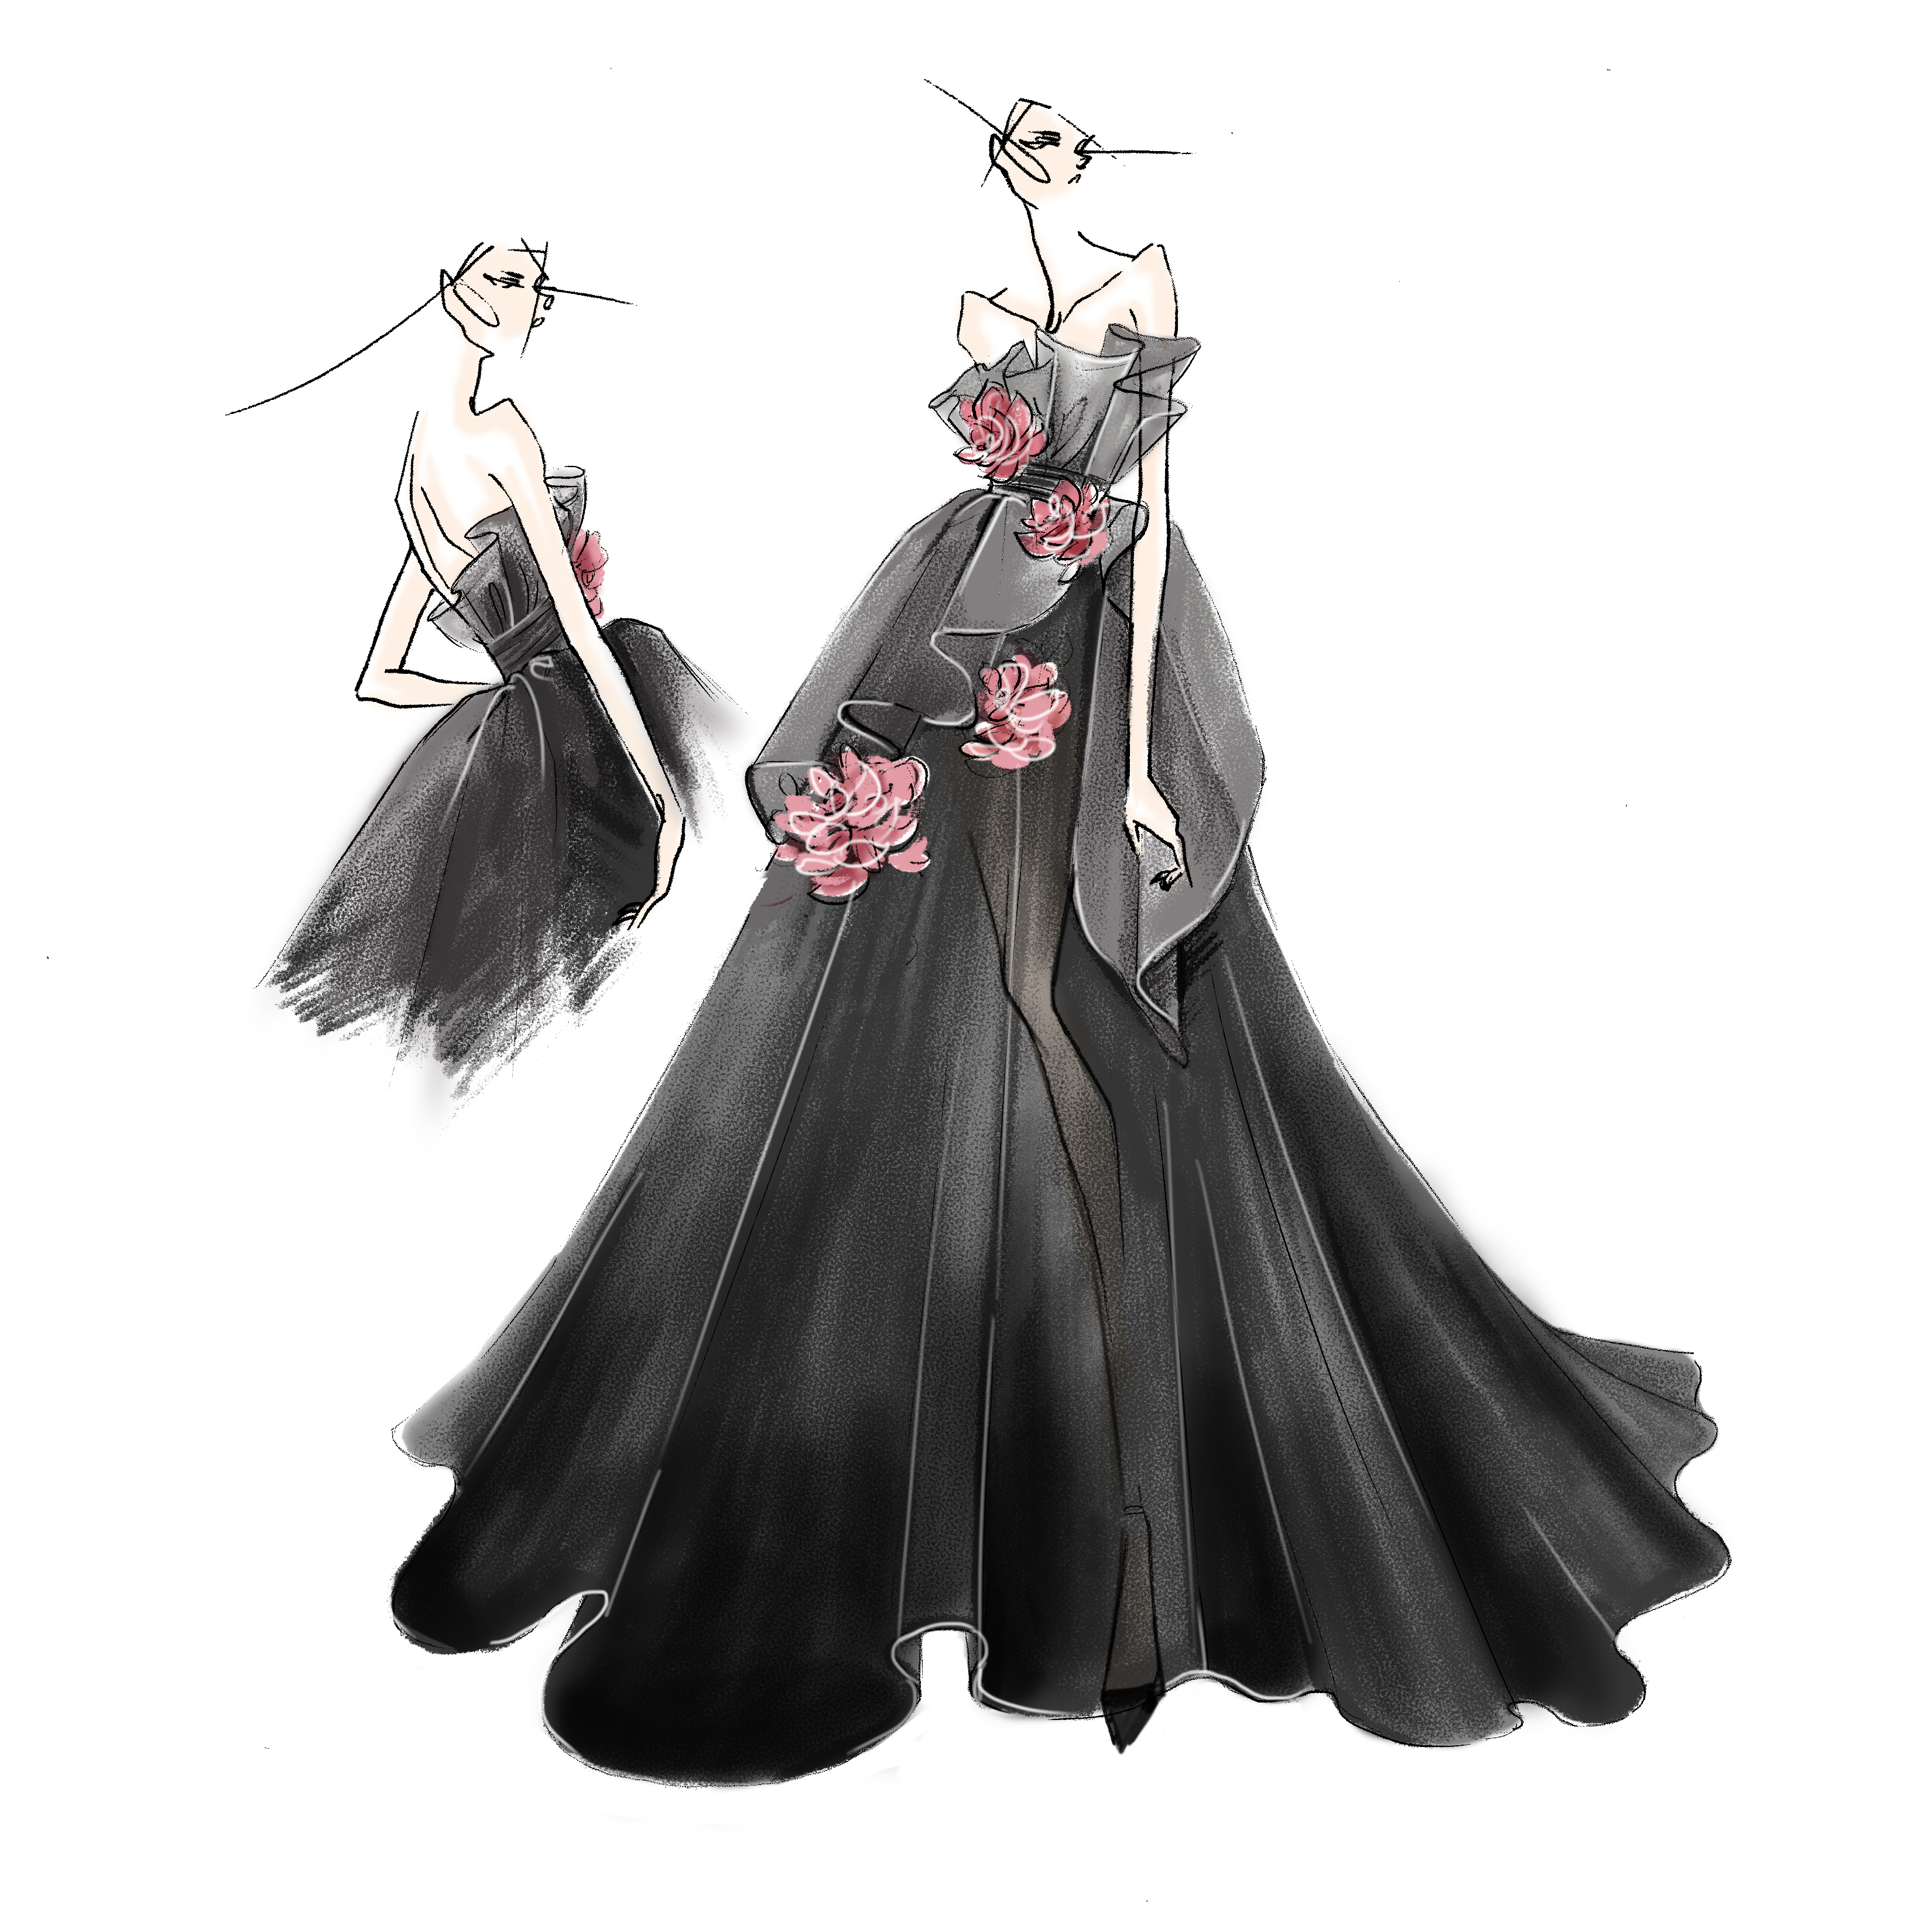 Sketch of a long black gown with flowers cascading down the front